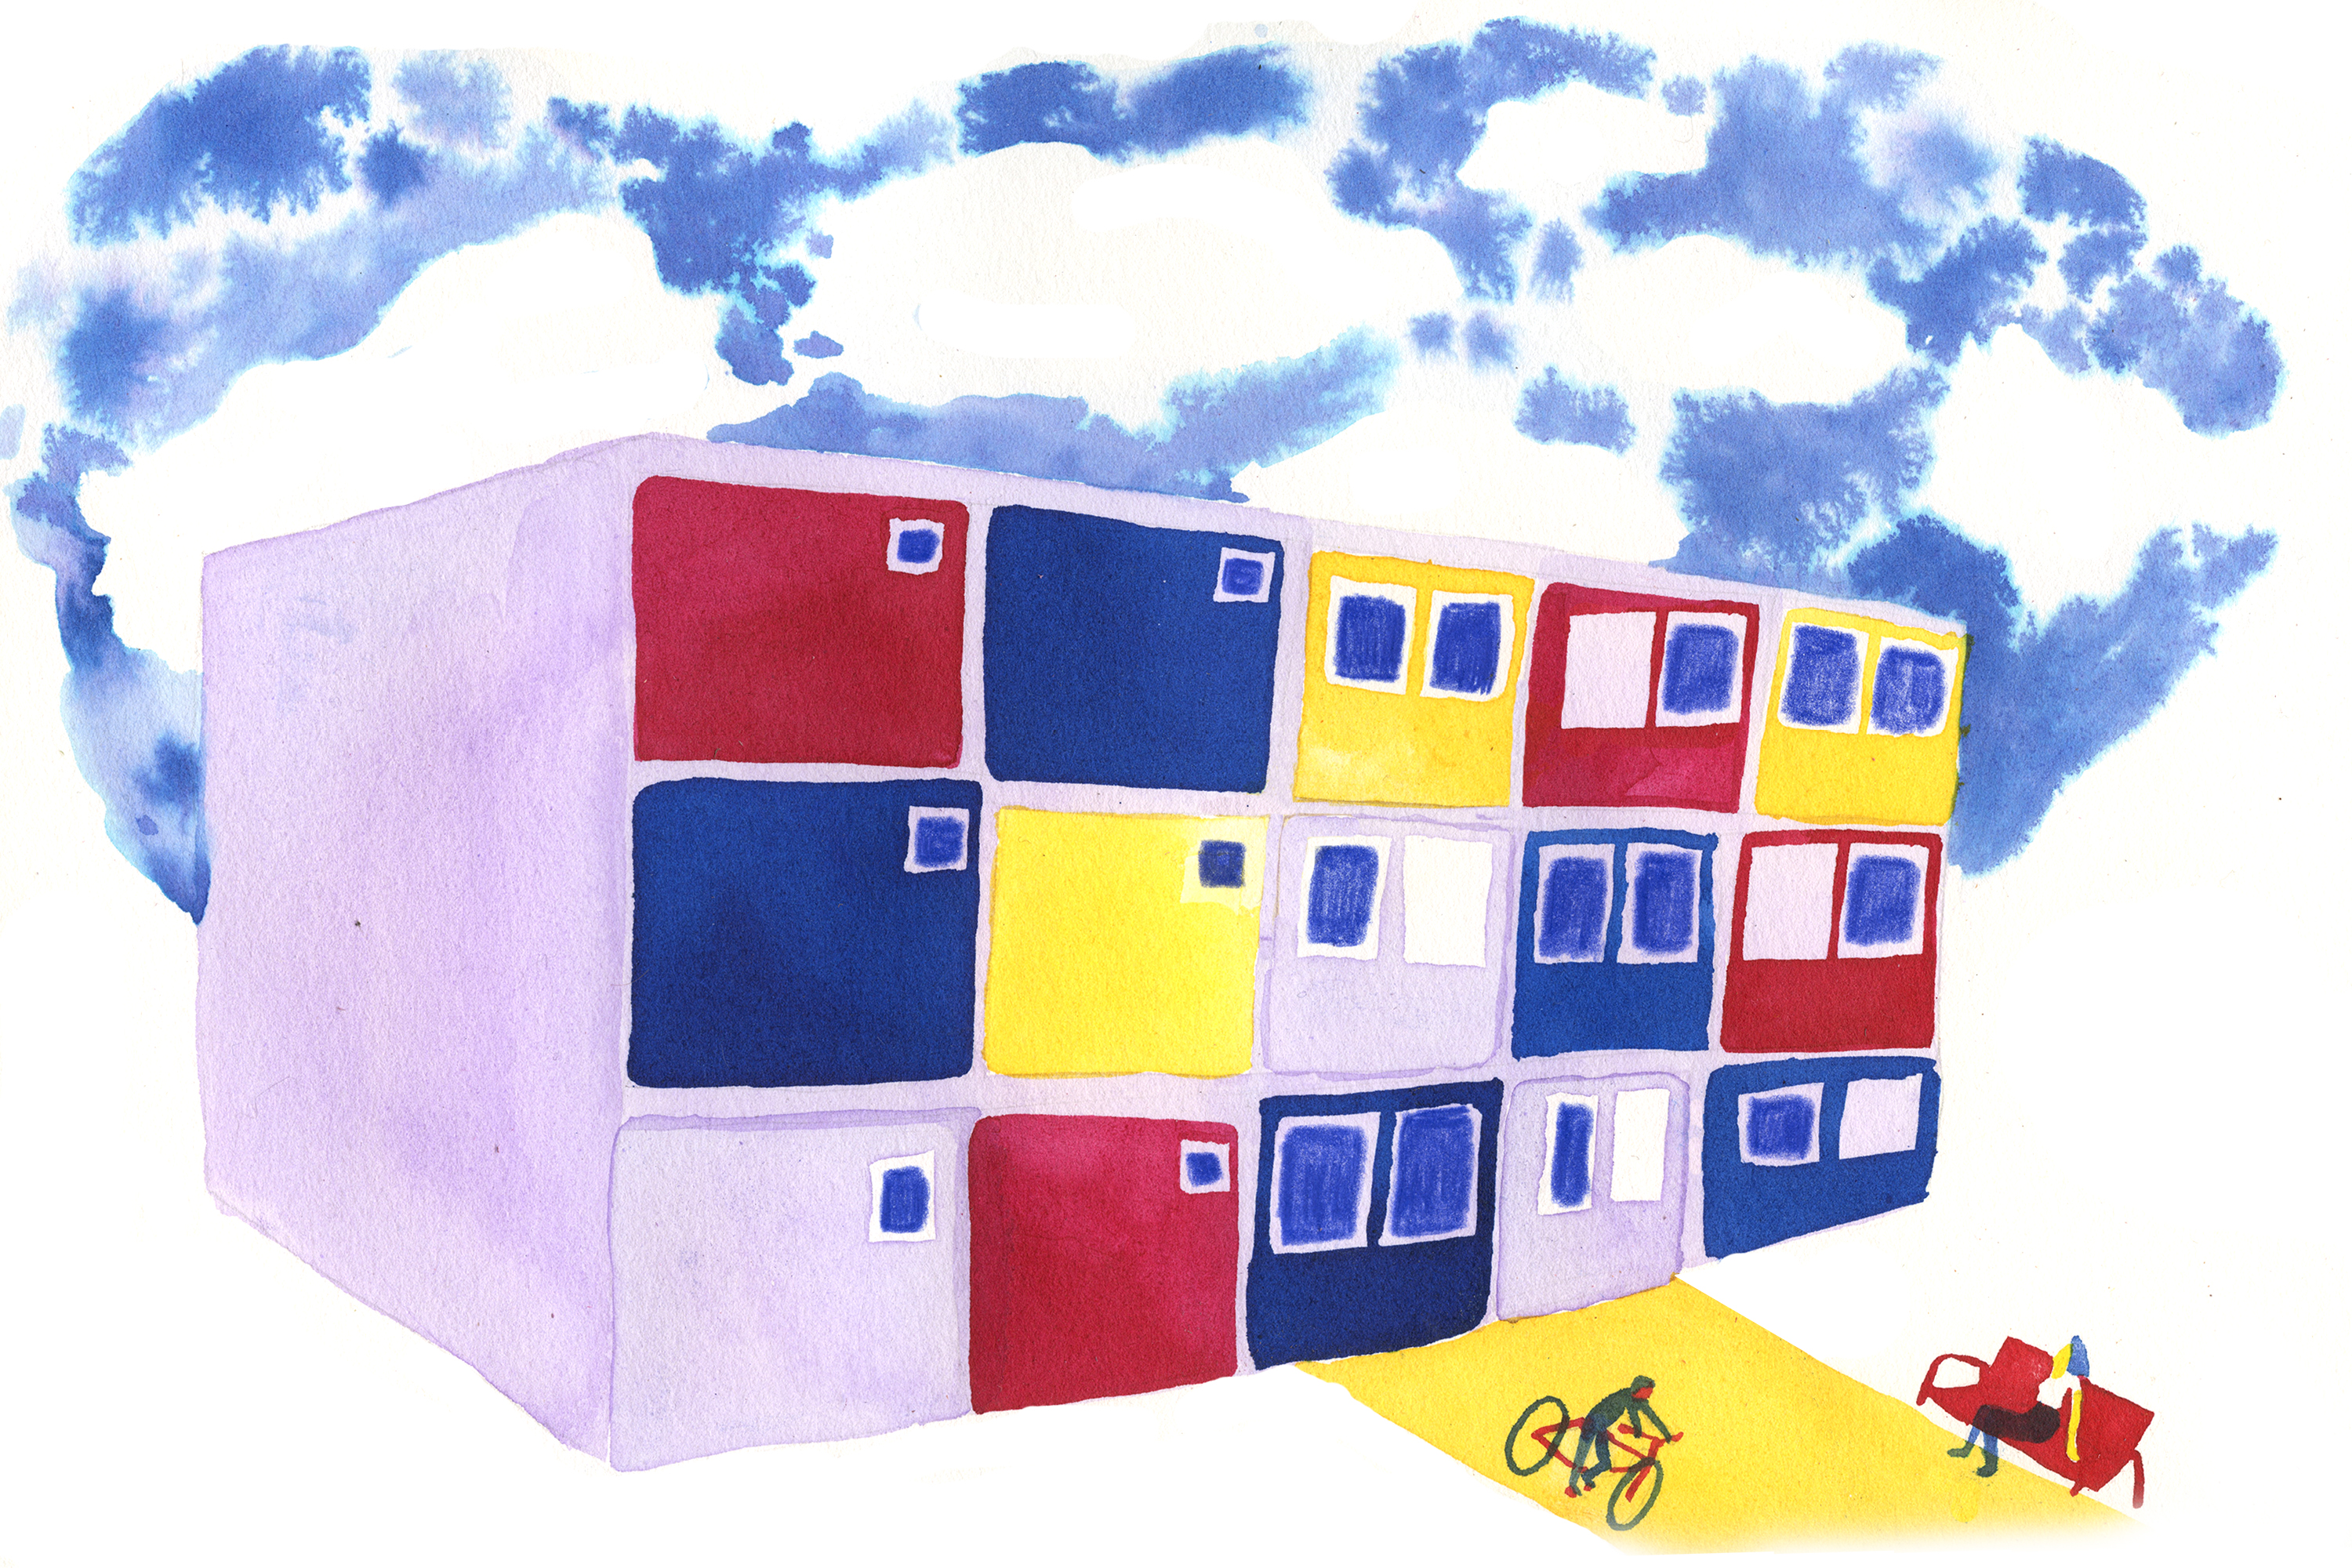 An illustration of an apartment building with red, yellow, and blue walls; a cyclist; a person sitting on a bench; and a blue sky with fluffy clouds.